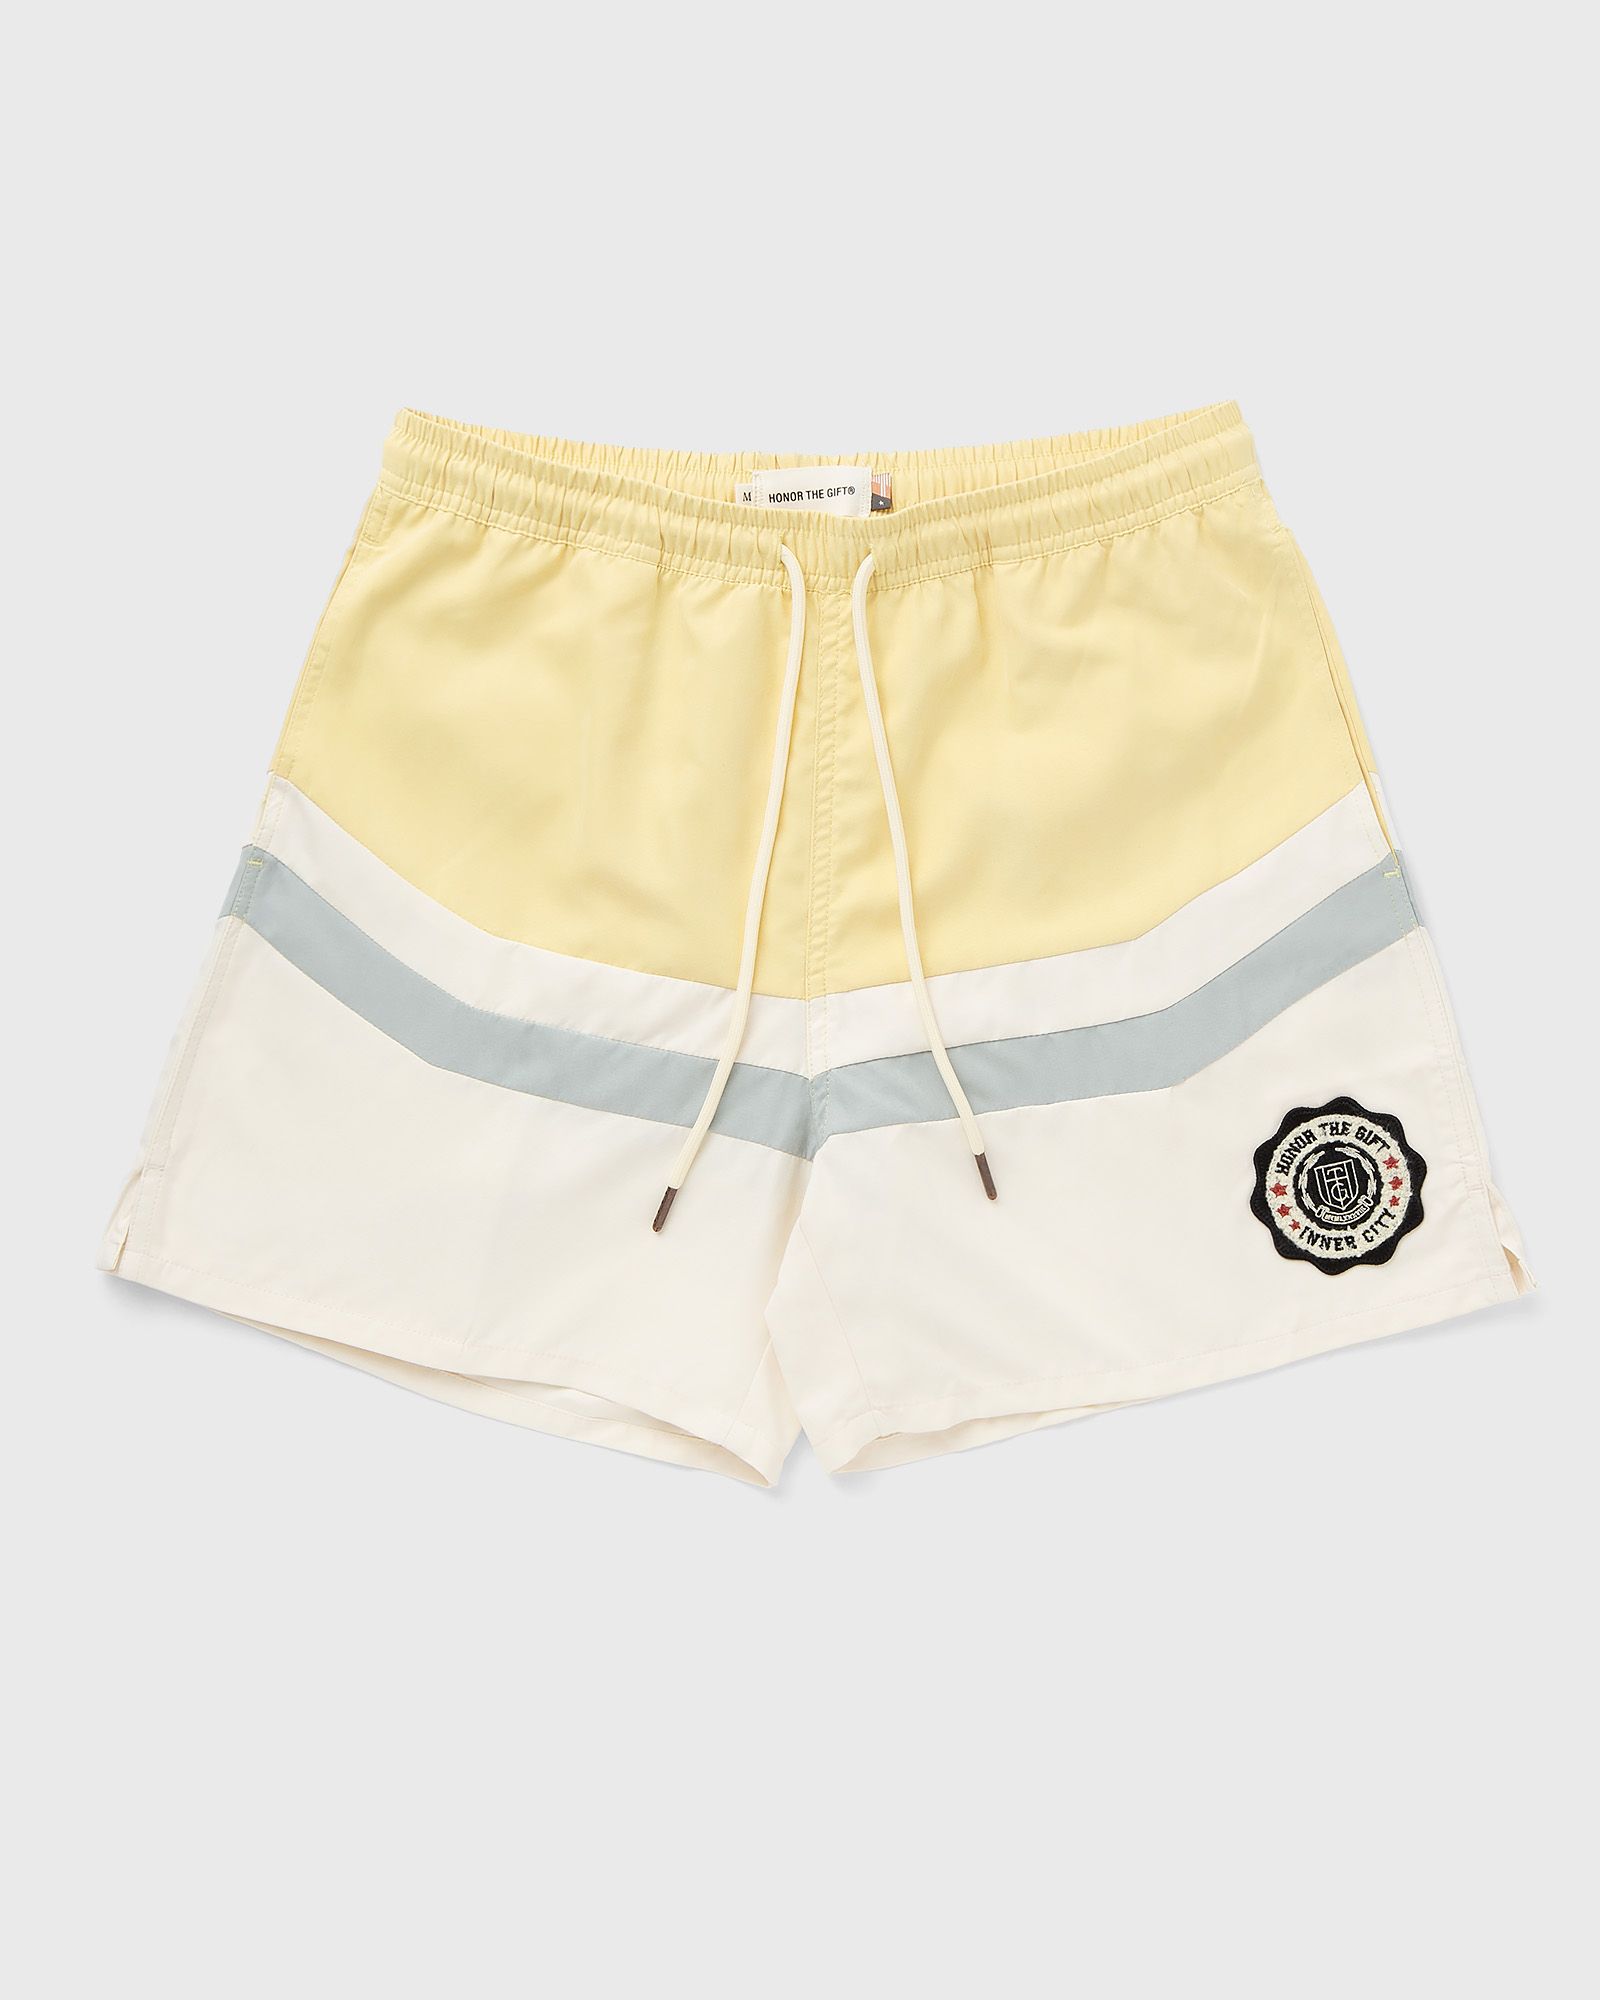 Honor The Gift BRUSHED POLY TRACK SHORT men Sport & Team Shorts yellow|beige in Größe:S von Honor The Gift